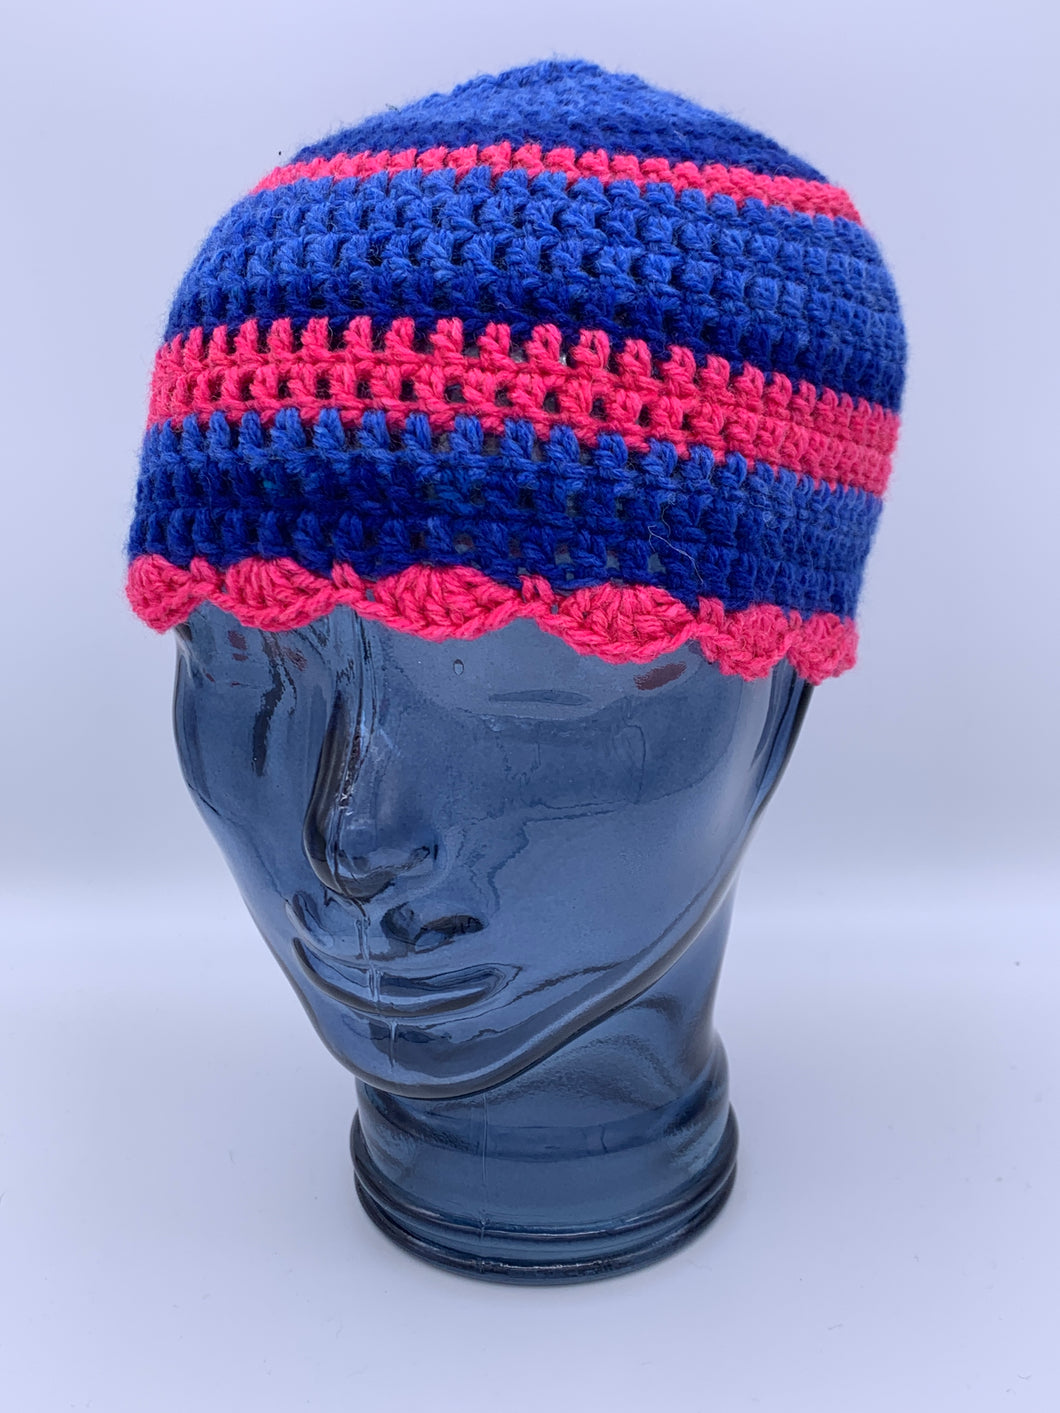 Crochet striped blue and pink beanie hat with scalloped edge- Size Teen/Small adult